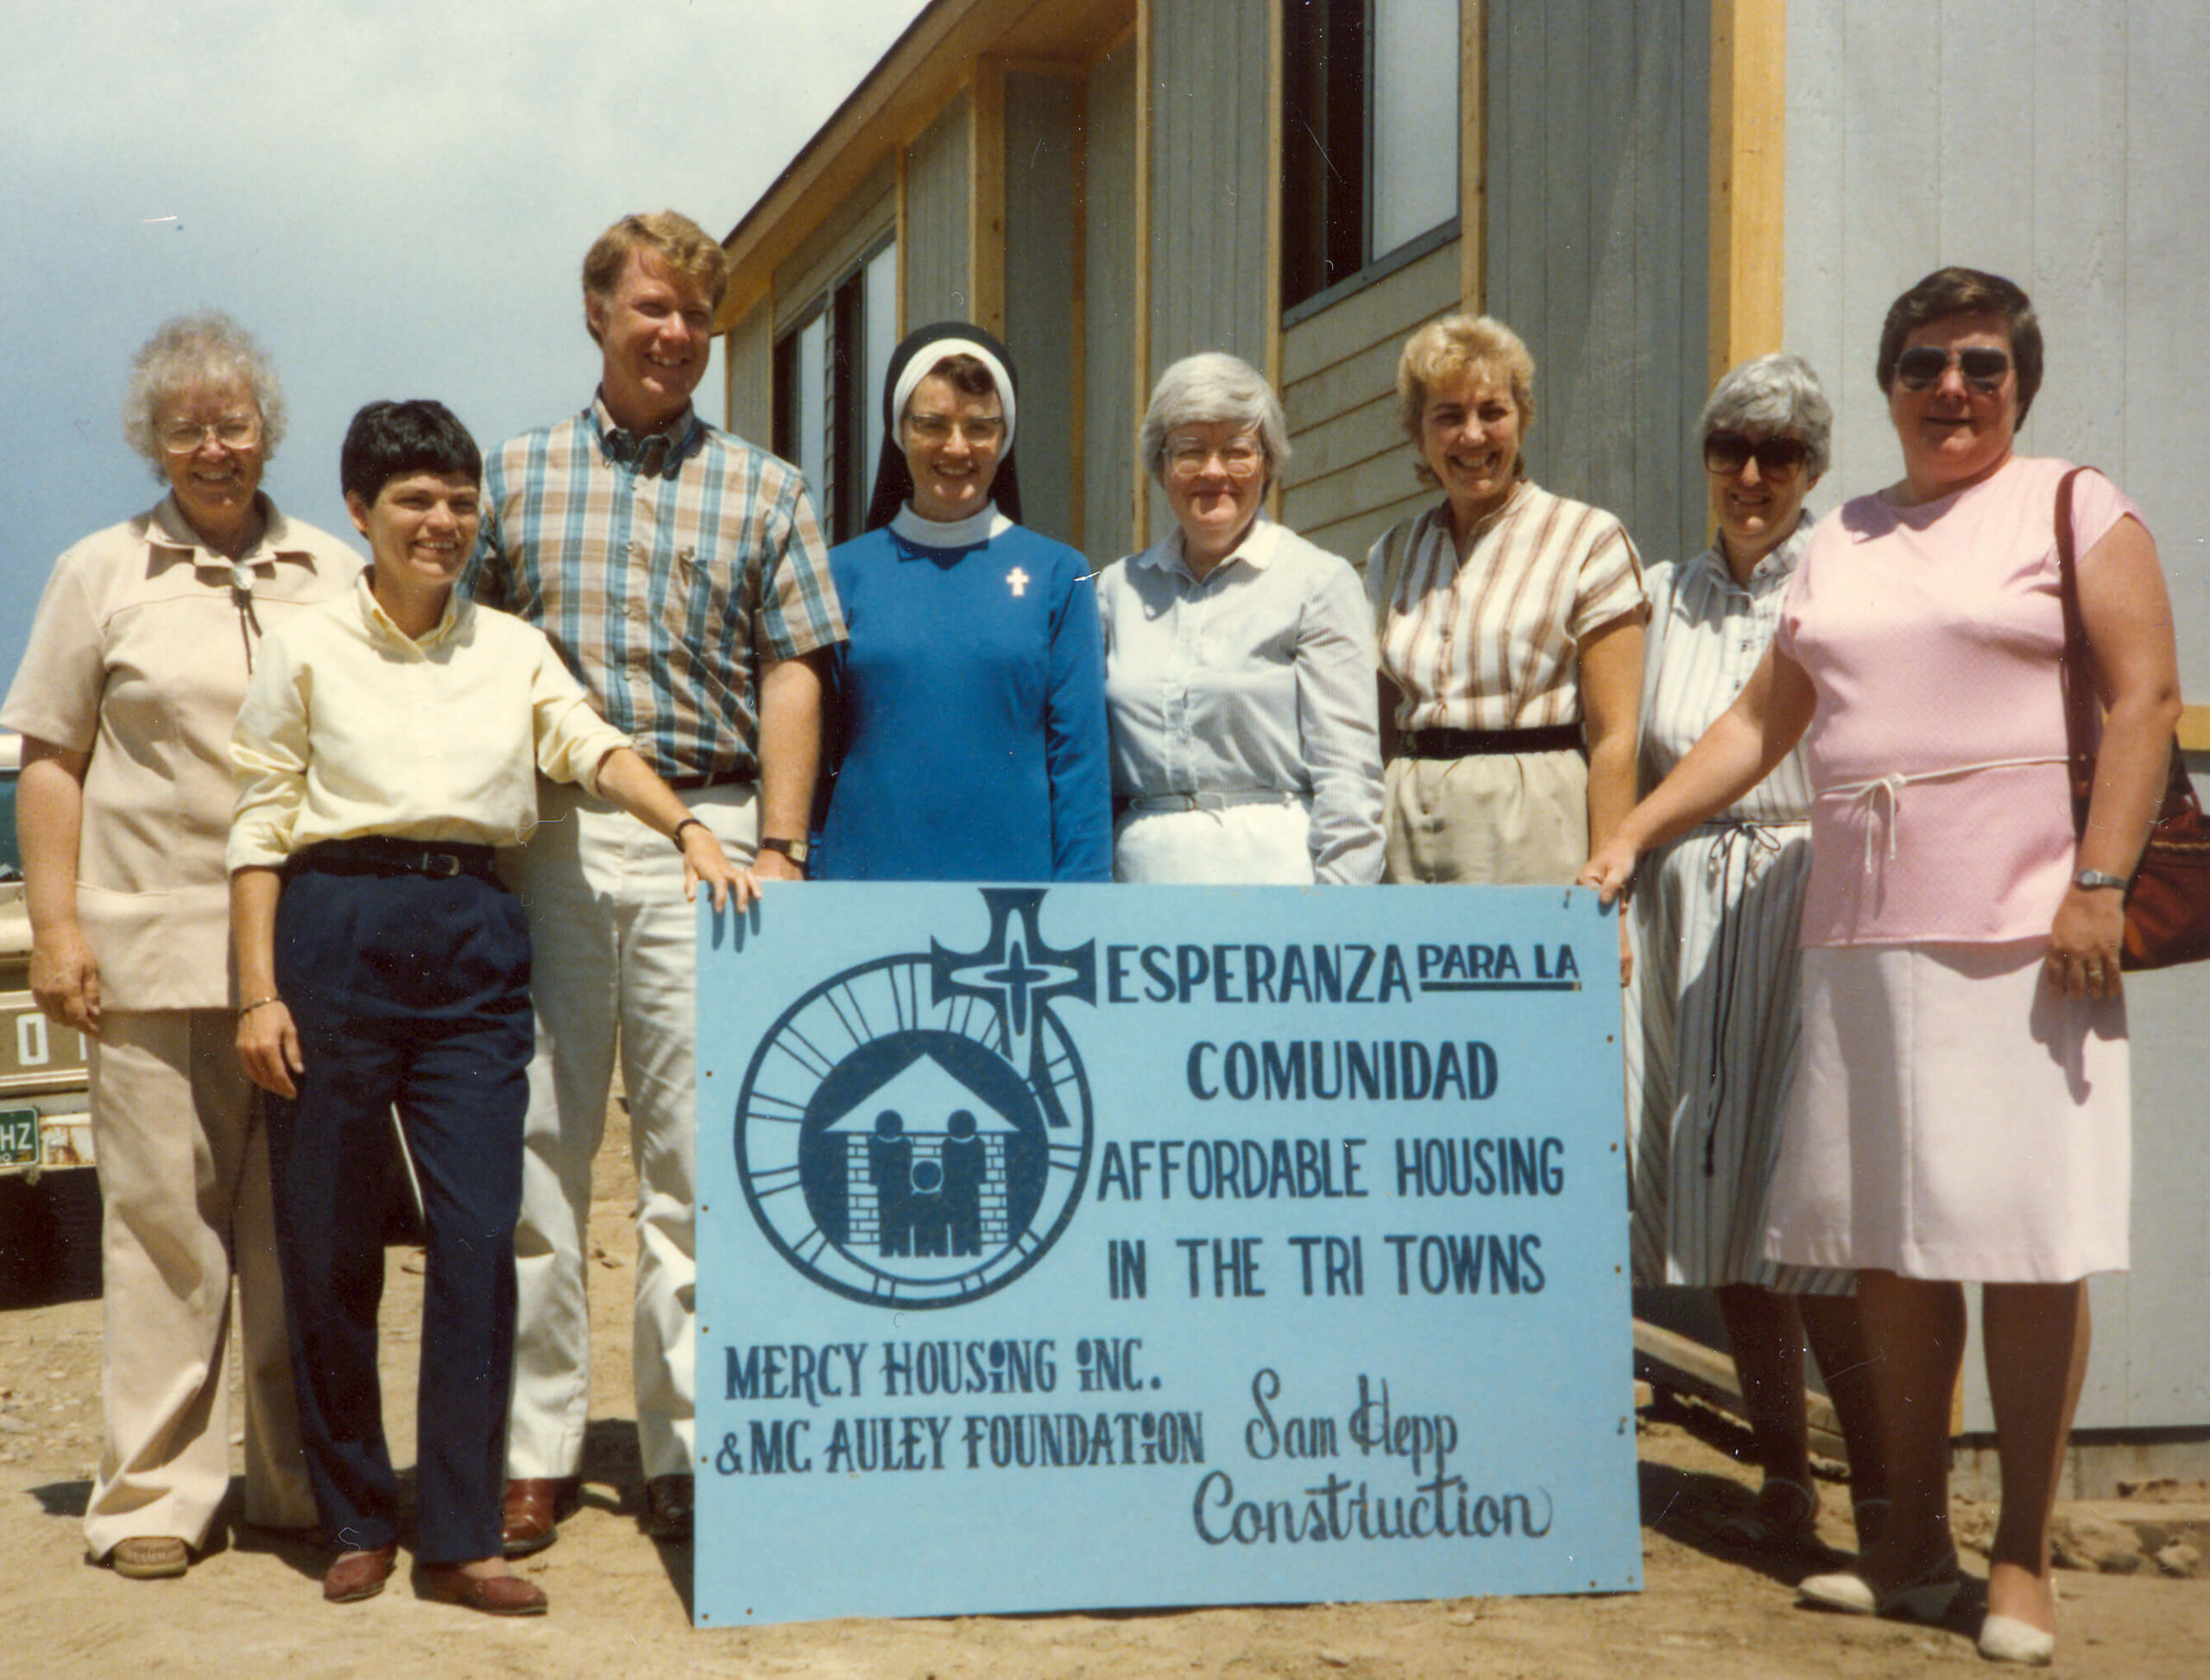 Group of people holding up sign that reads 'Ezperanza de la comunidad, affordable housing in the tritowns. Mercy housing and Mac Auley foundation.'